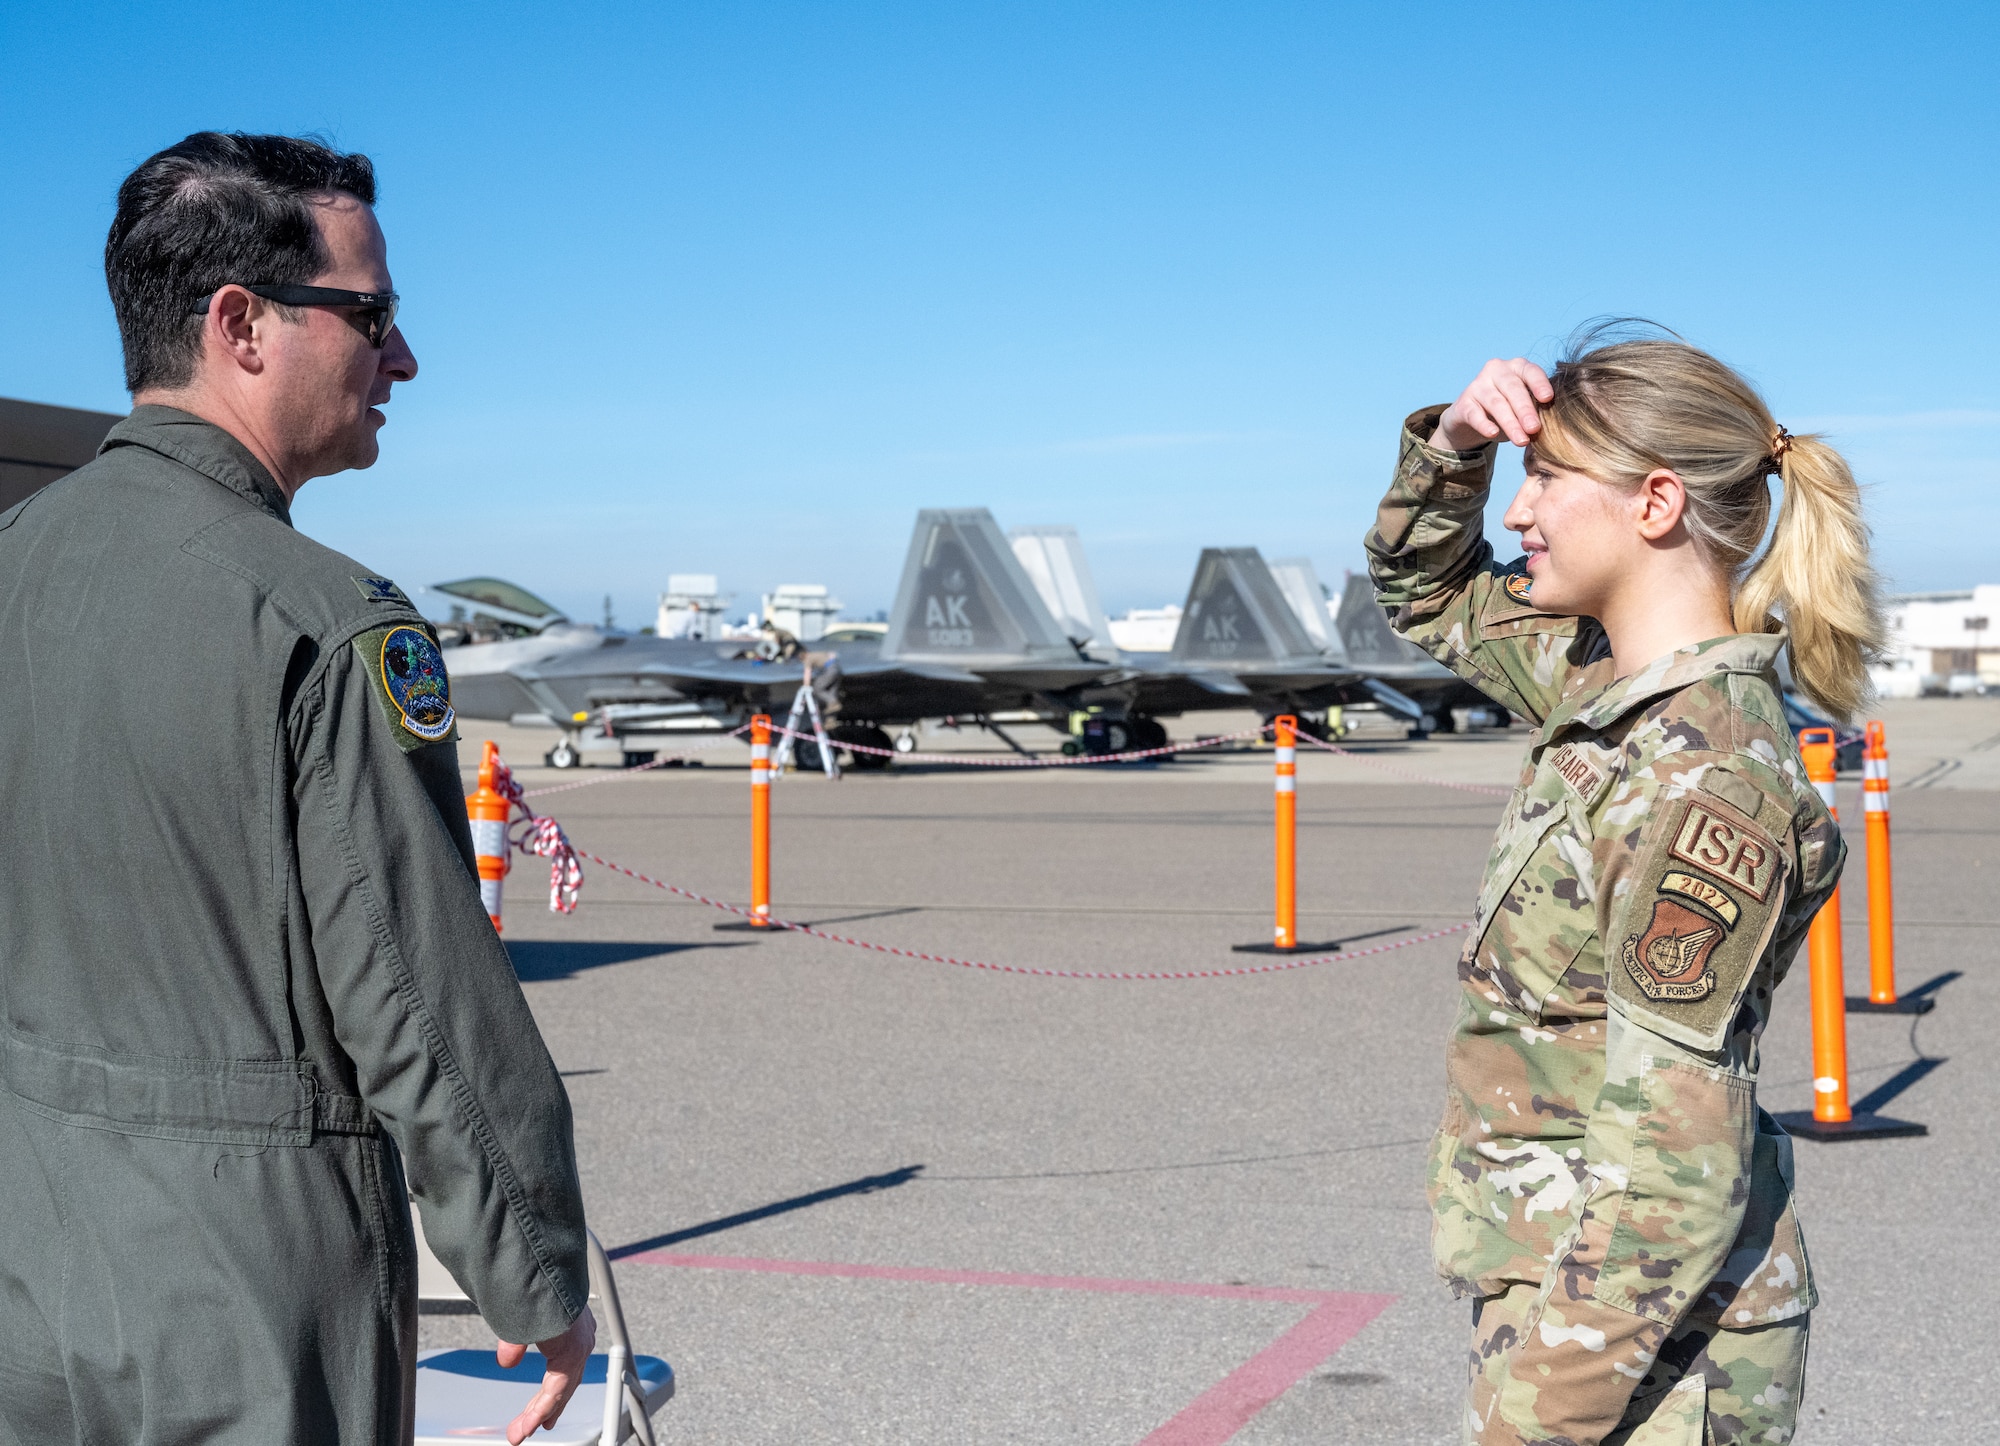 U.S. Air Force Col. Kevin Jamieson (left), 3rd Air Expeditionary Wing commander, out of Joint Base Elmendorf-Richardson, Alaska, speaks with U.S. Air Force Airman First Class Hannah Roberson, 525th Expeditionary Fighter Squadron intelligence specialist, during Exercise Bamboo Eagle 24-1 at spoke Naval Air Station North Island, California, Jan. 31, 2024.